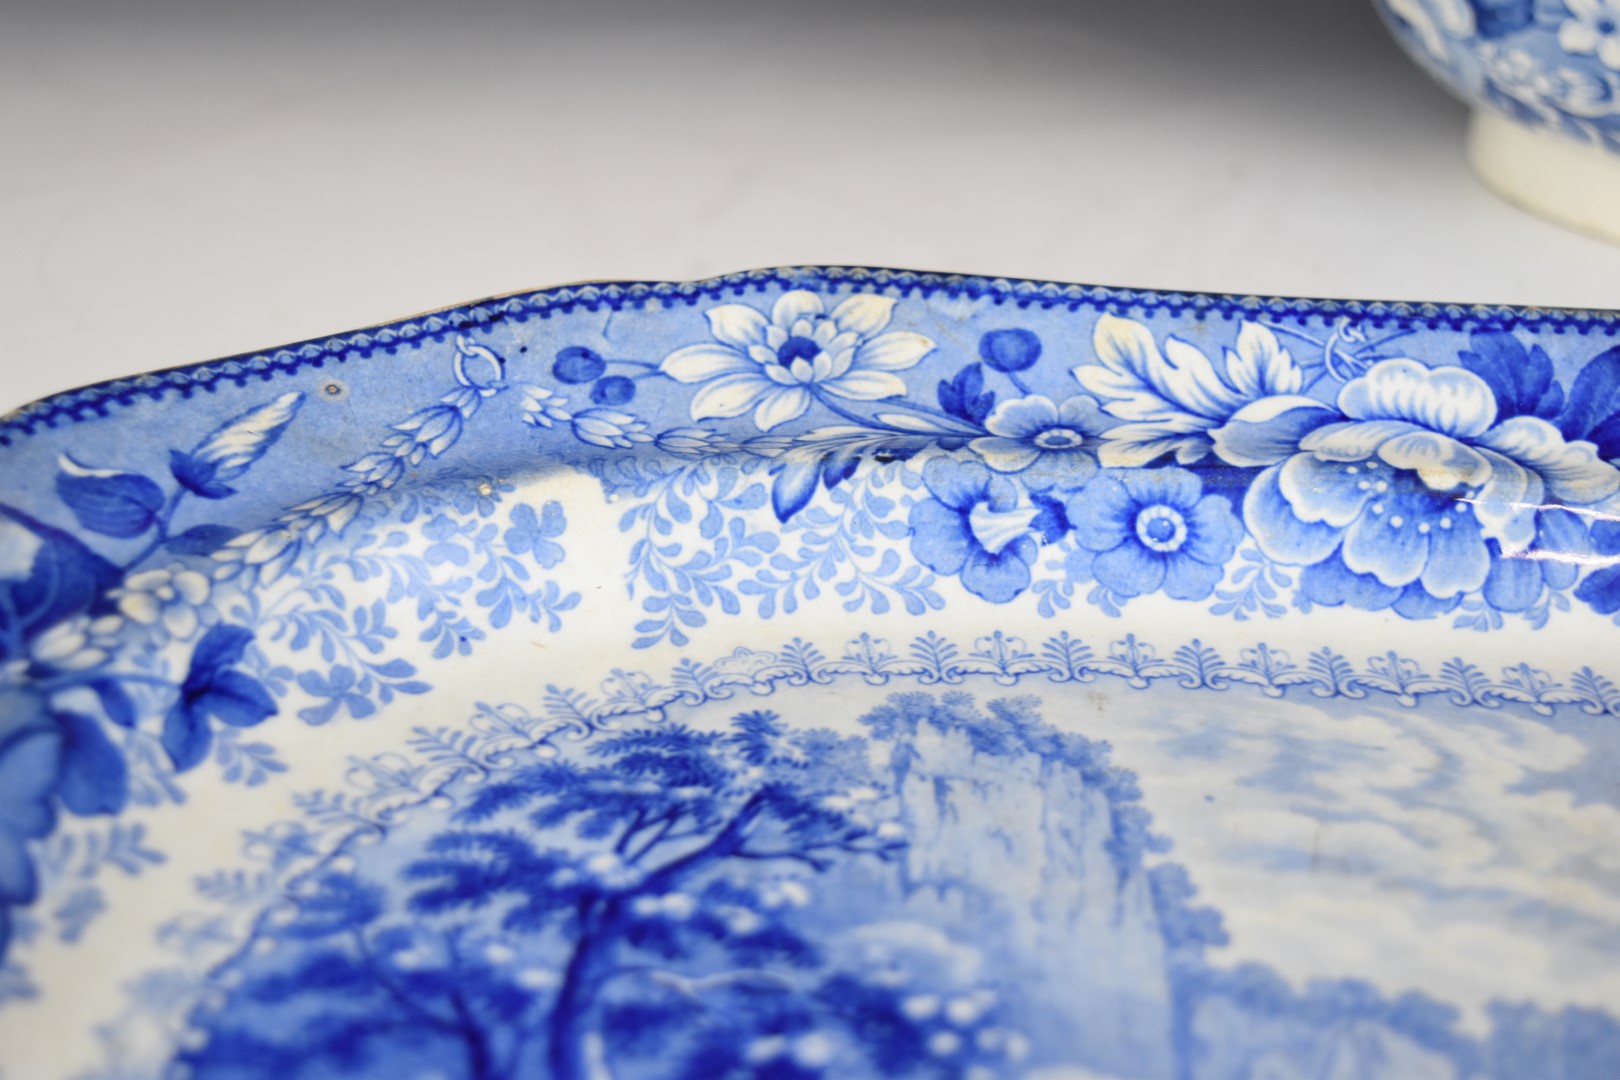 19thC blue and white transfer printed ware with named scenes of Bristol, Clifton and River Avon, - Image 6 of 10